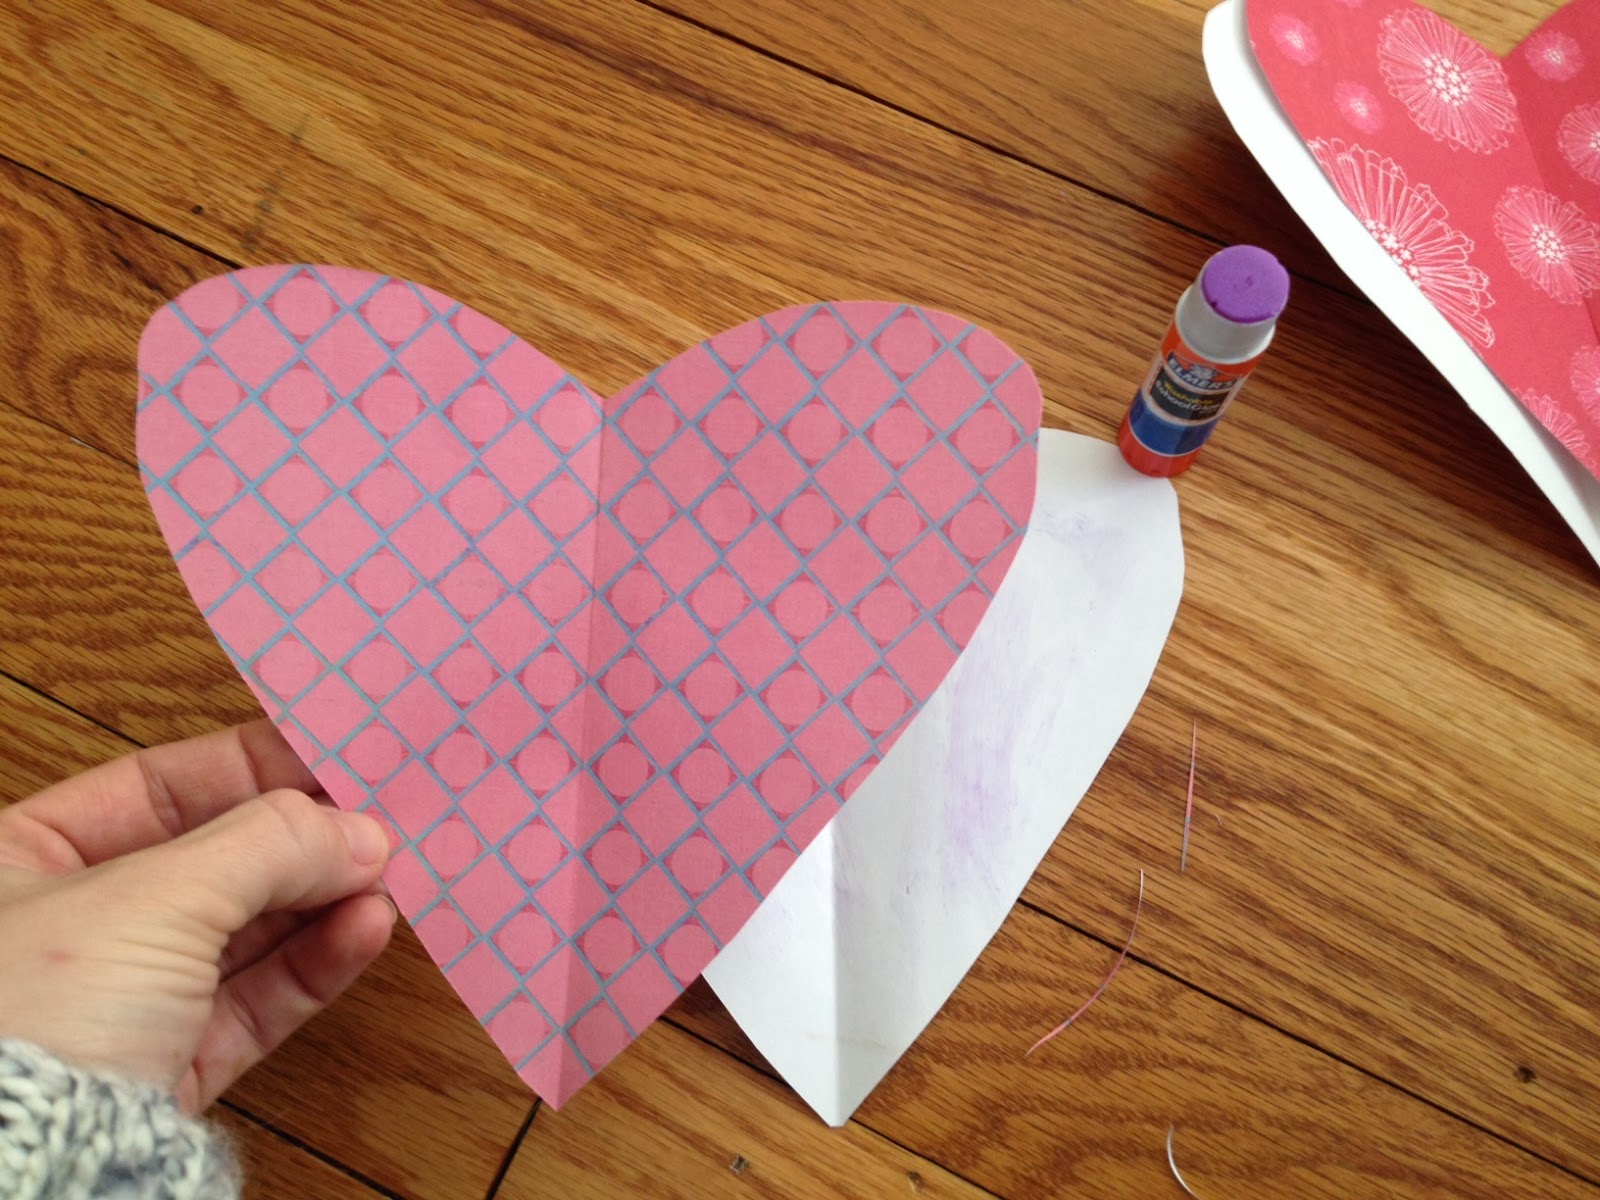 Two It Yourself: How to make 3D paper hearts for Valentine's Day crafts